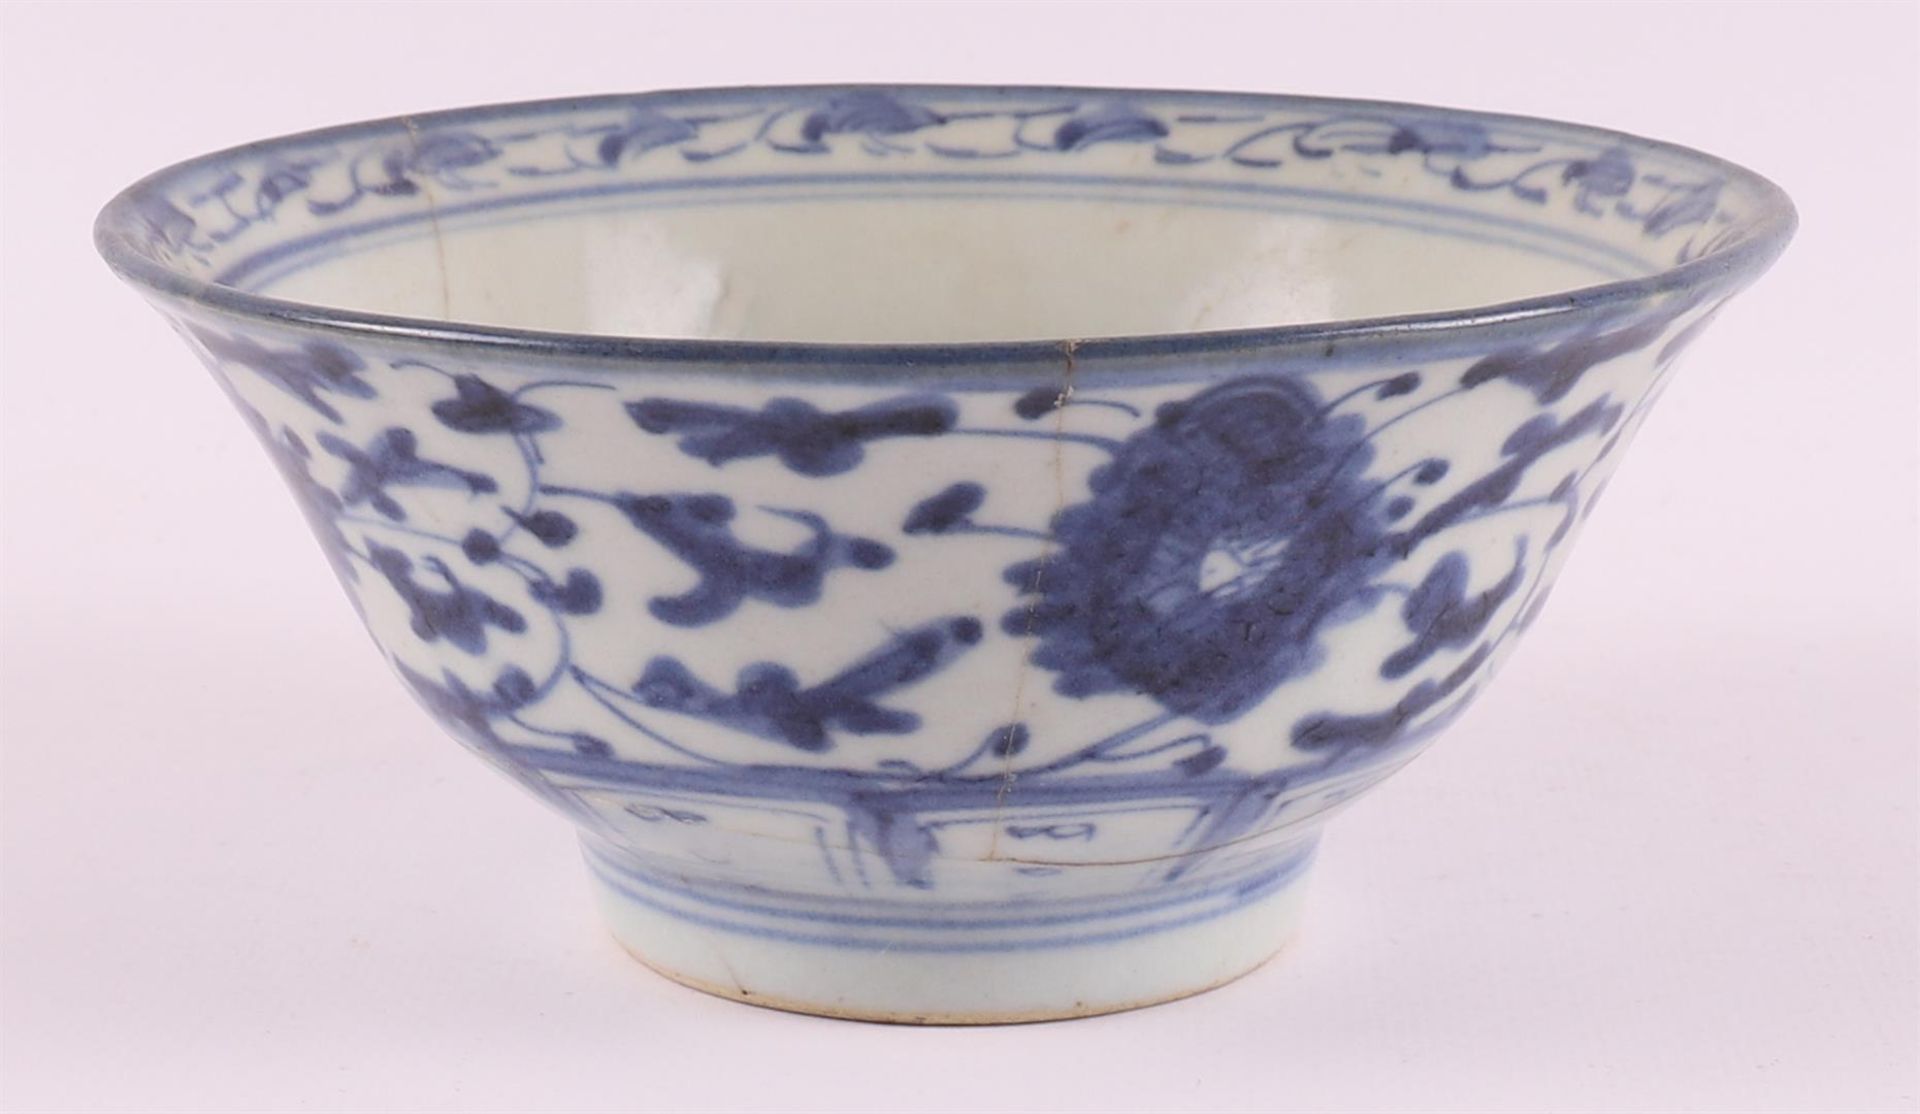 A lot of various Chinese porcelain bowls, China, 18th century - Image 23 of 25